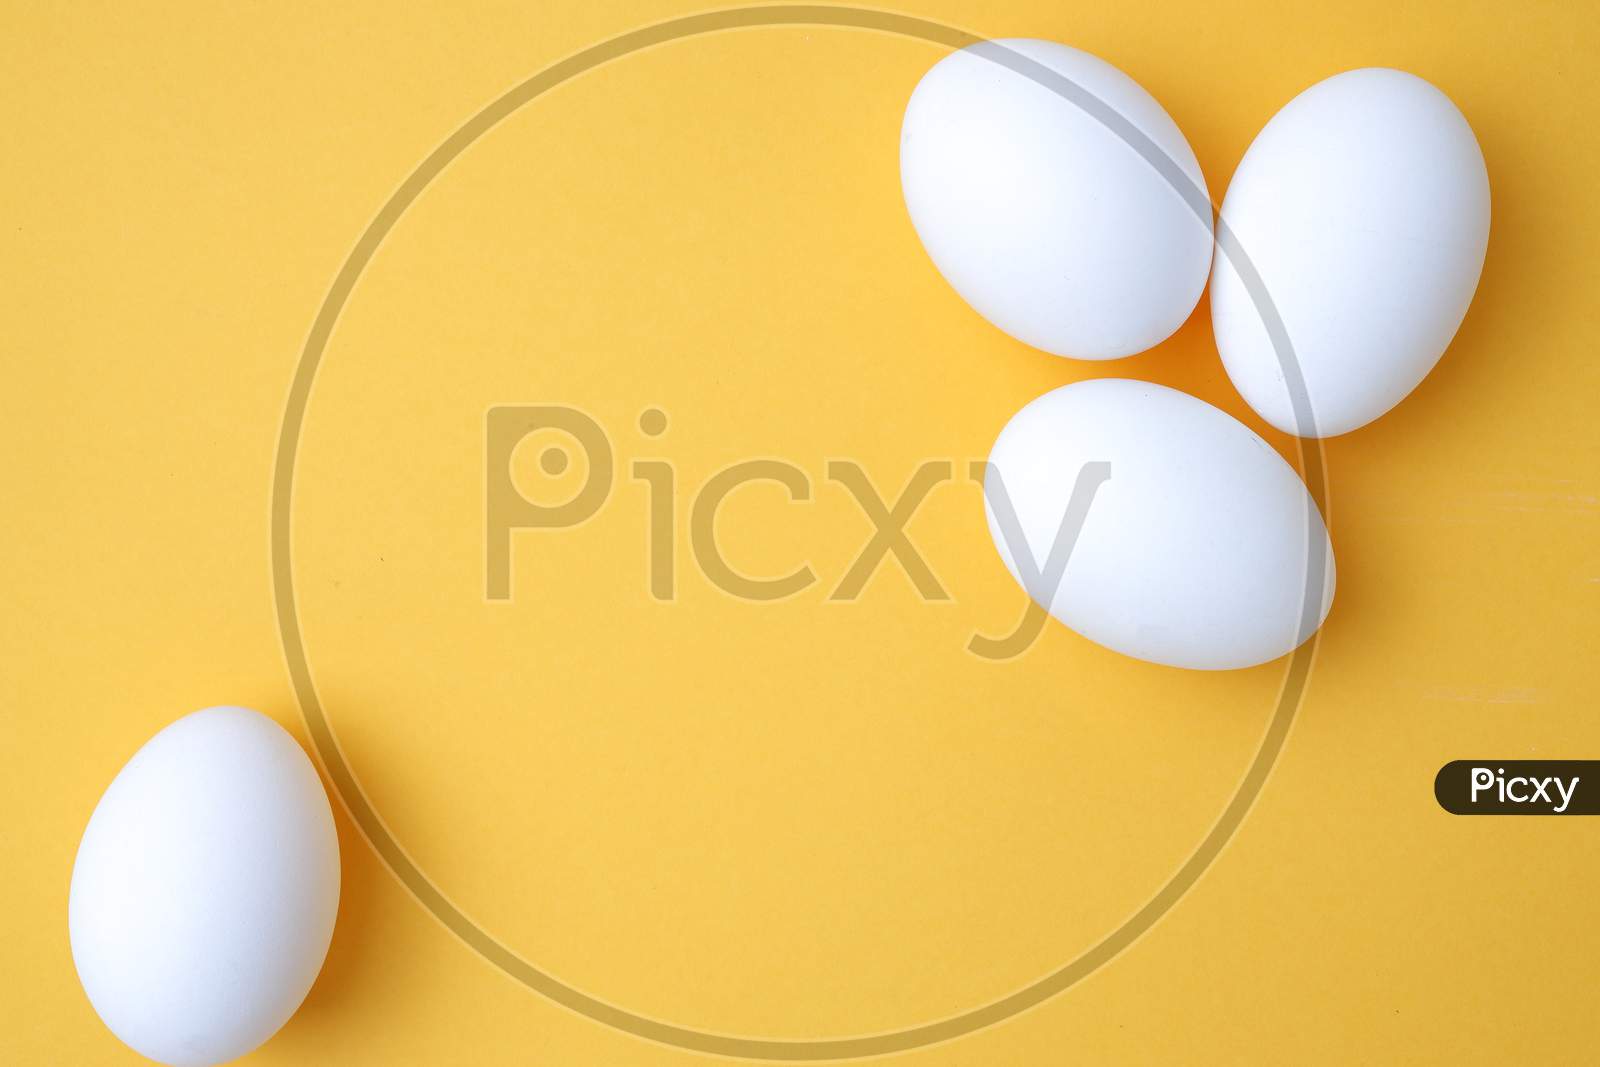 Eggs,Three White Egg On The Yellow Background In Center,Copy Space For The Ads